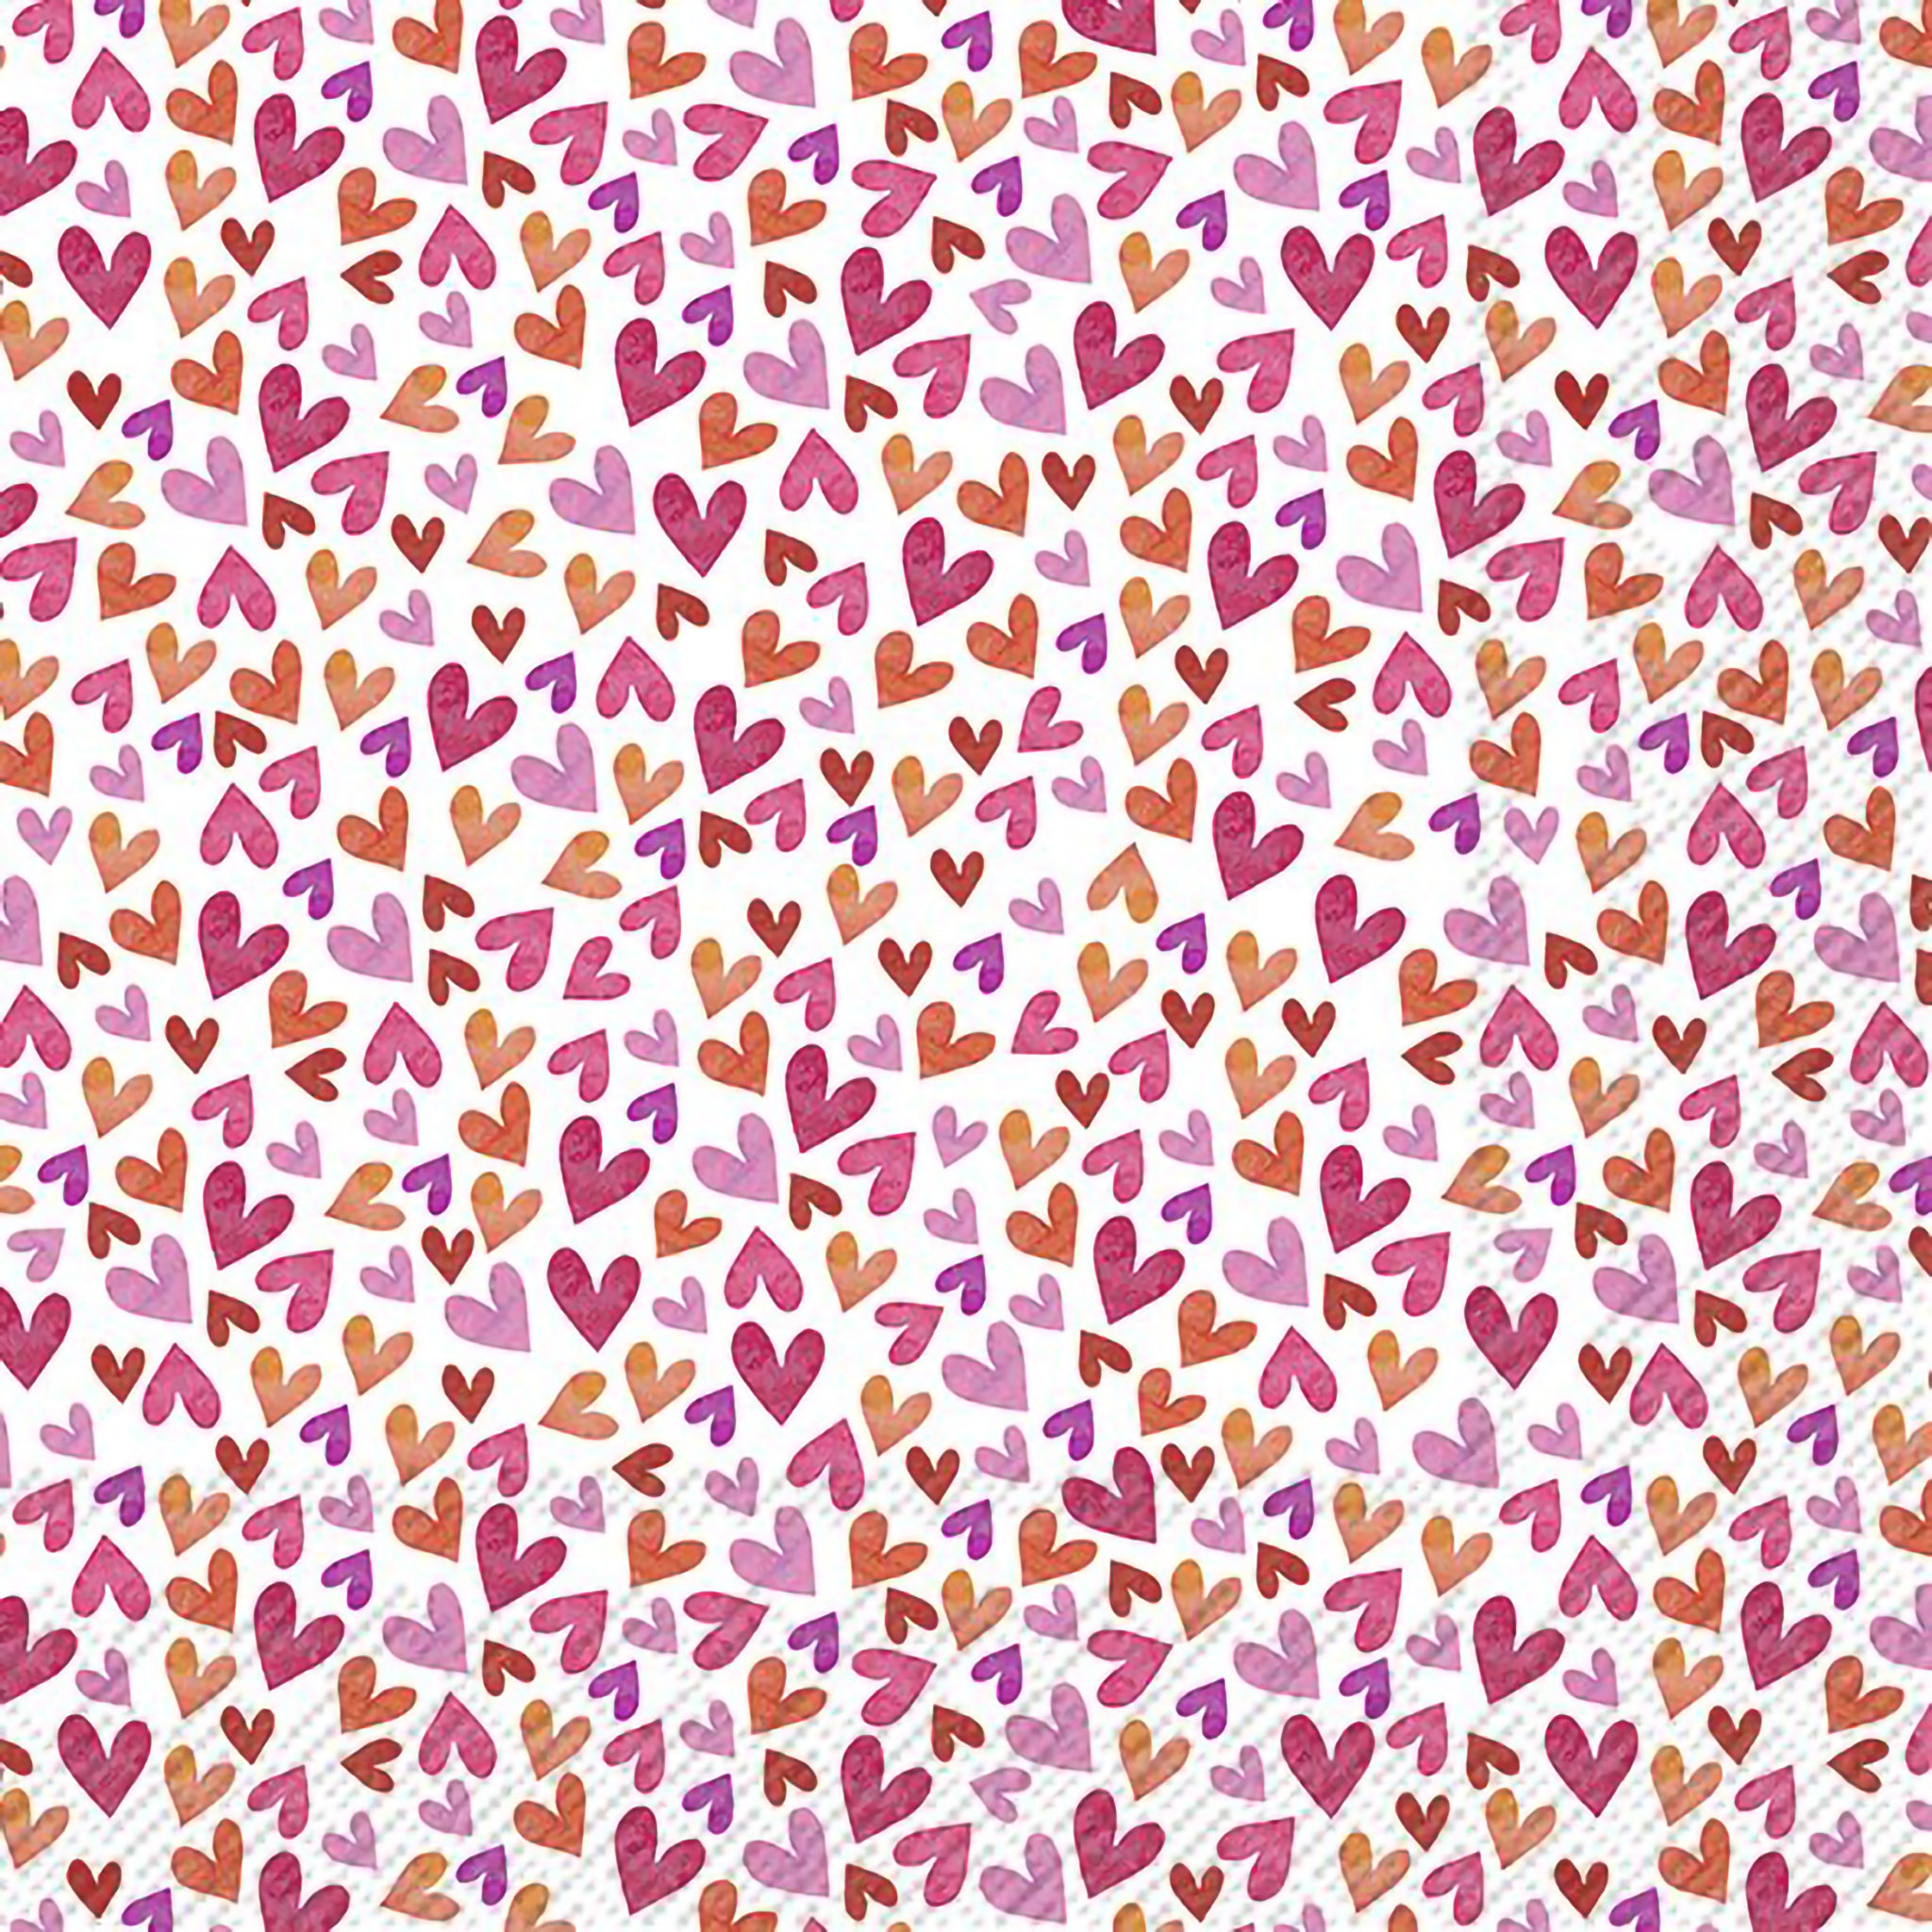 A ditsy heart patterned napkin with pink, purple and orange hearts all over